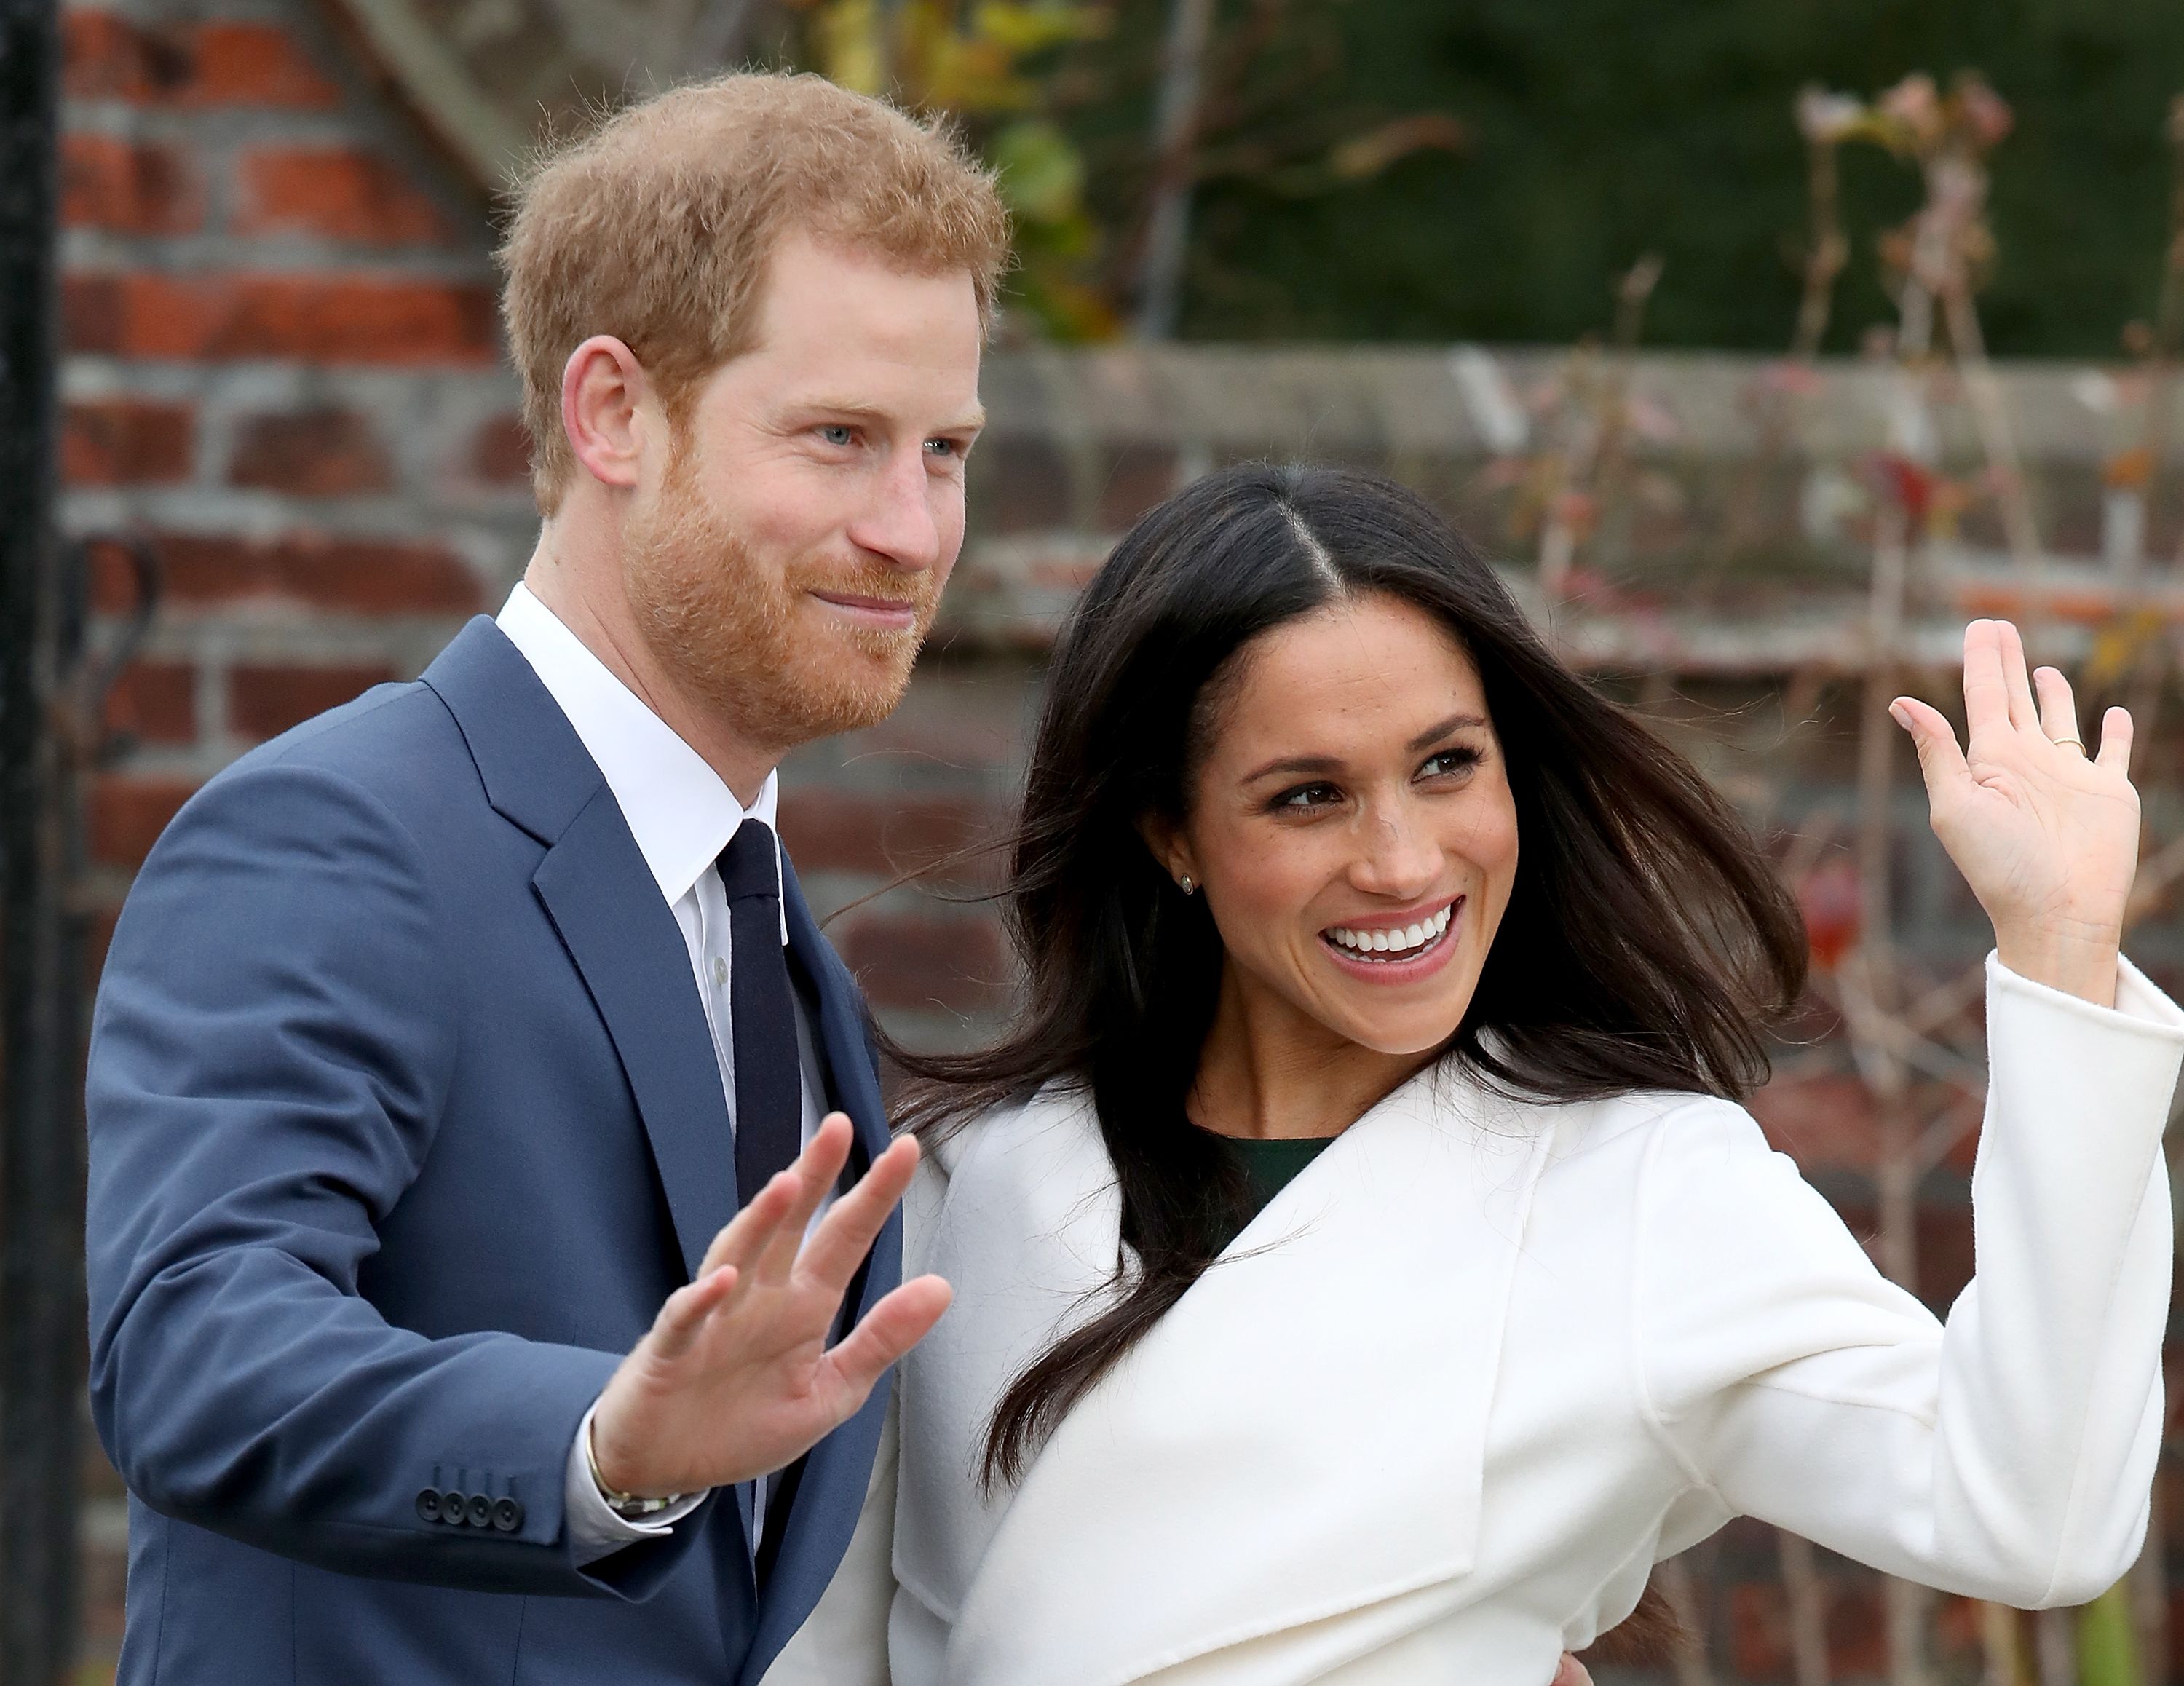 Prince Harry and Meghan Markle during an official photocall to announce their engagement at The Sunken Gardens at Kensington Palace on November 27, 2017 | Photo: Getty Images